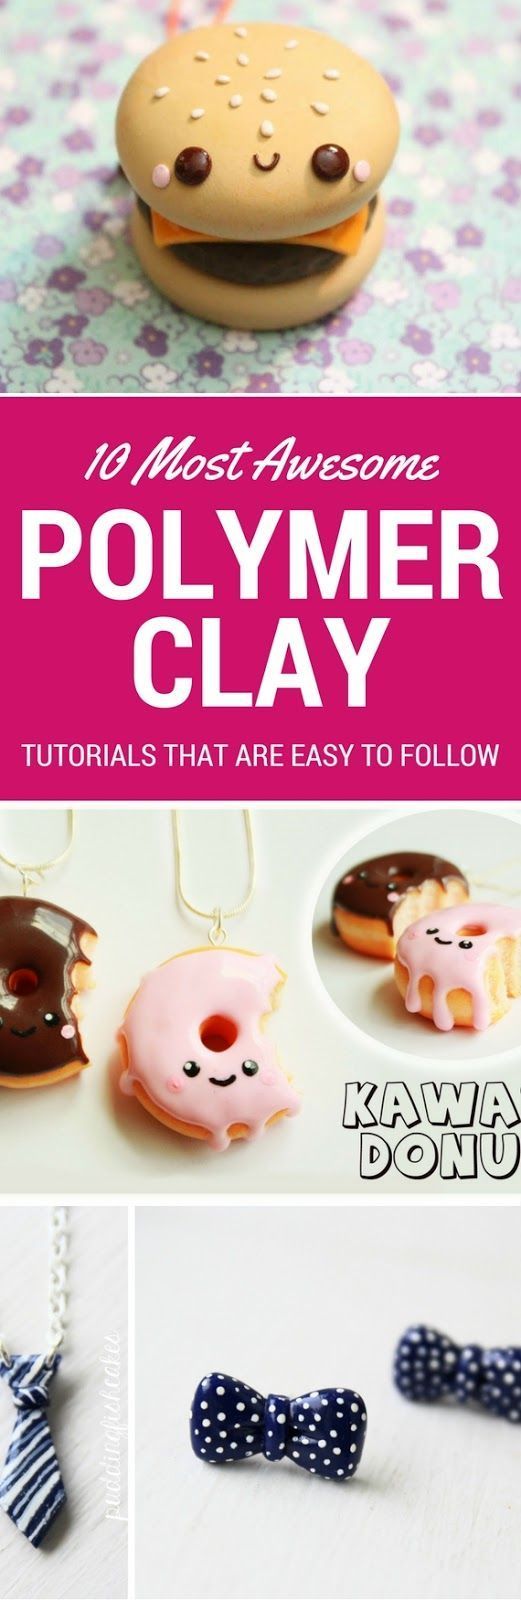 10 Polymer Clay Tutorials Step By Step Anyone Can Follow – Looking for a fun DIY Craft Project? Then you totally have to try